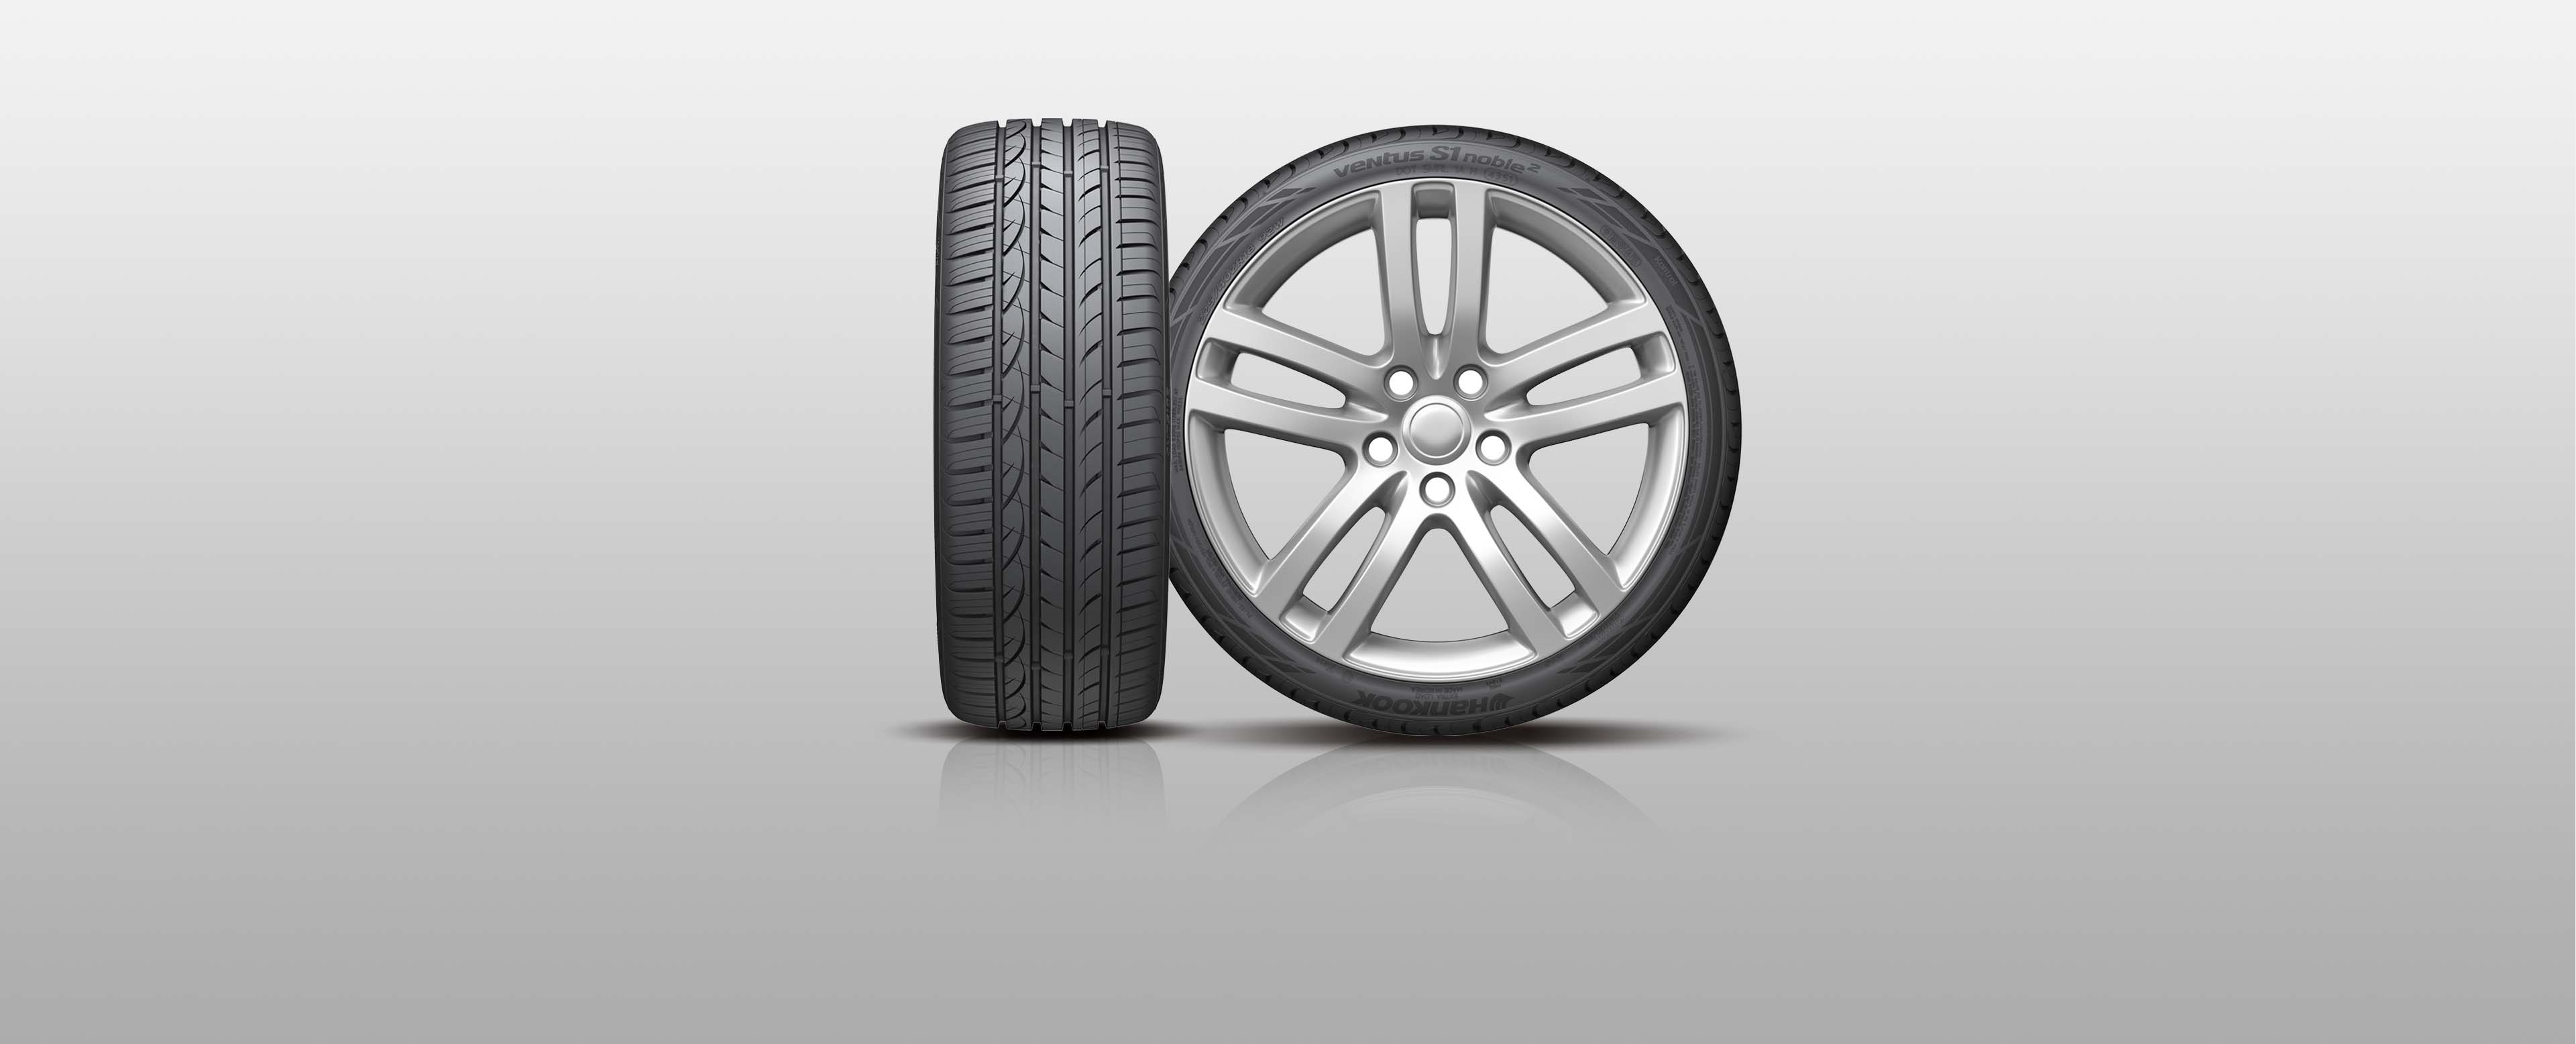 Hankook Tire & Technology-Tires-Ventus-Ventus S1 Noble2-H452-The ideal balanced performance tire